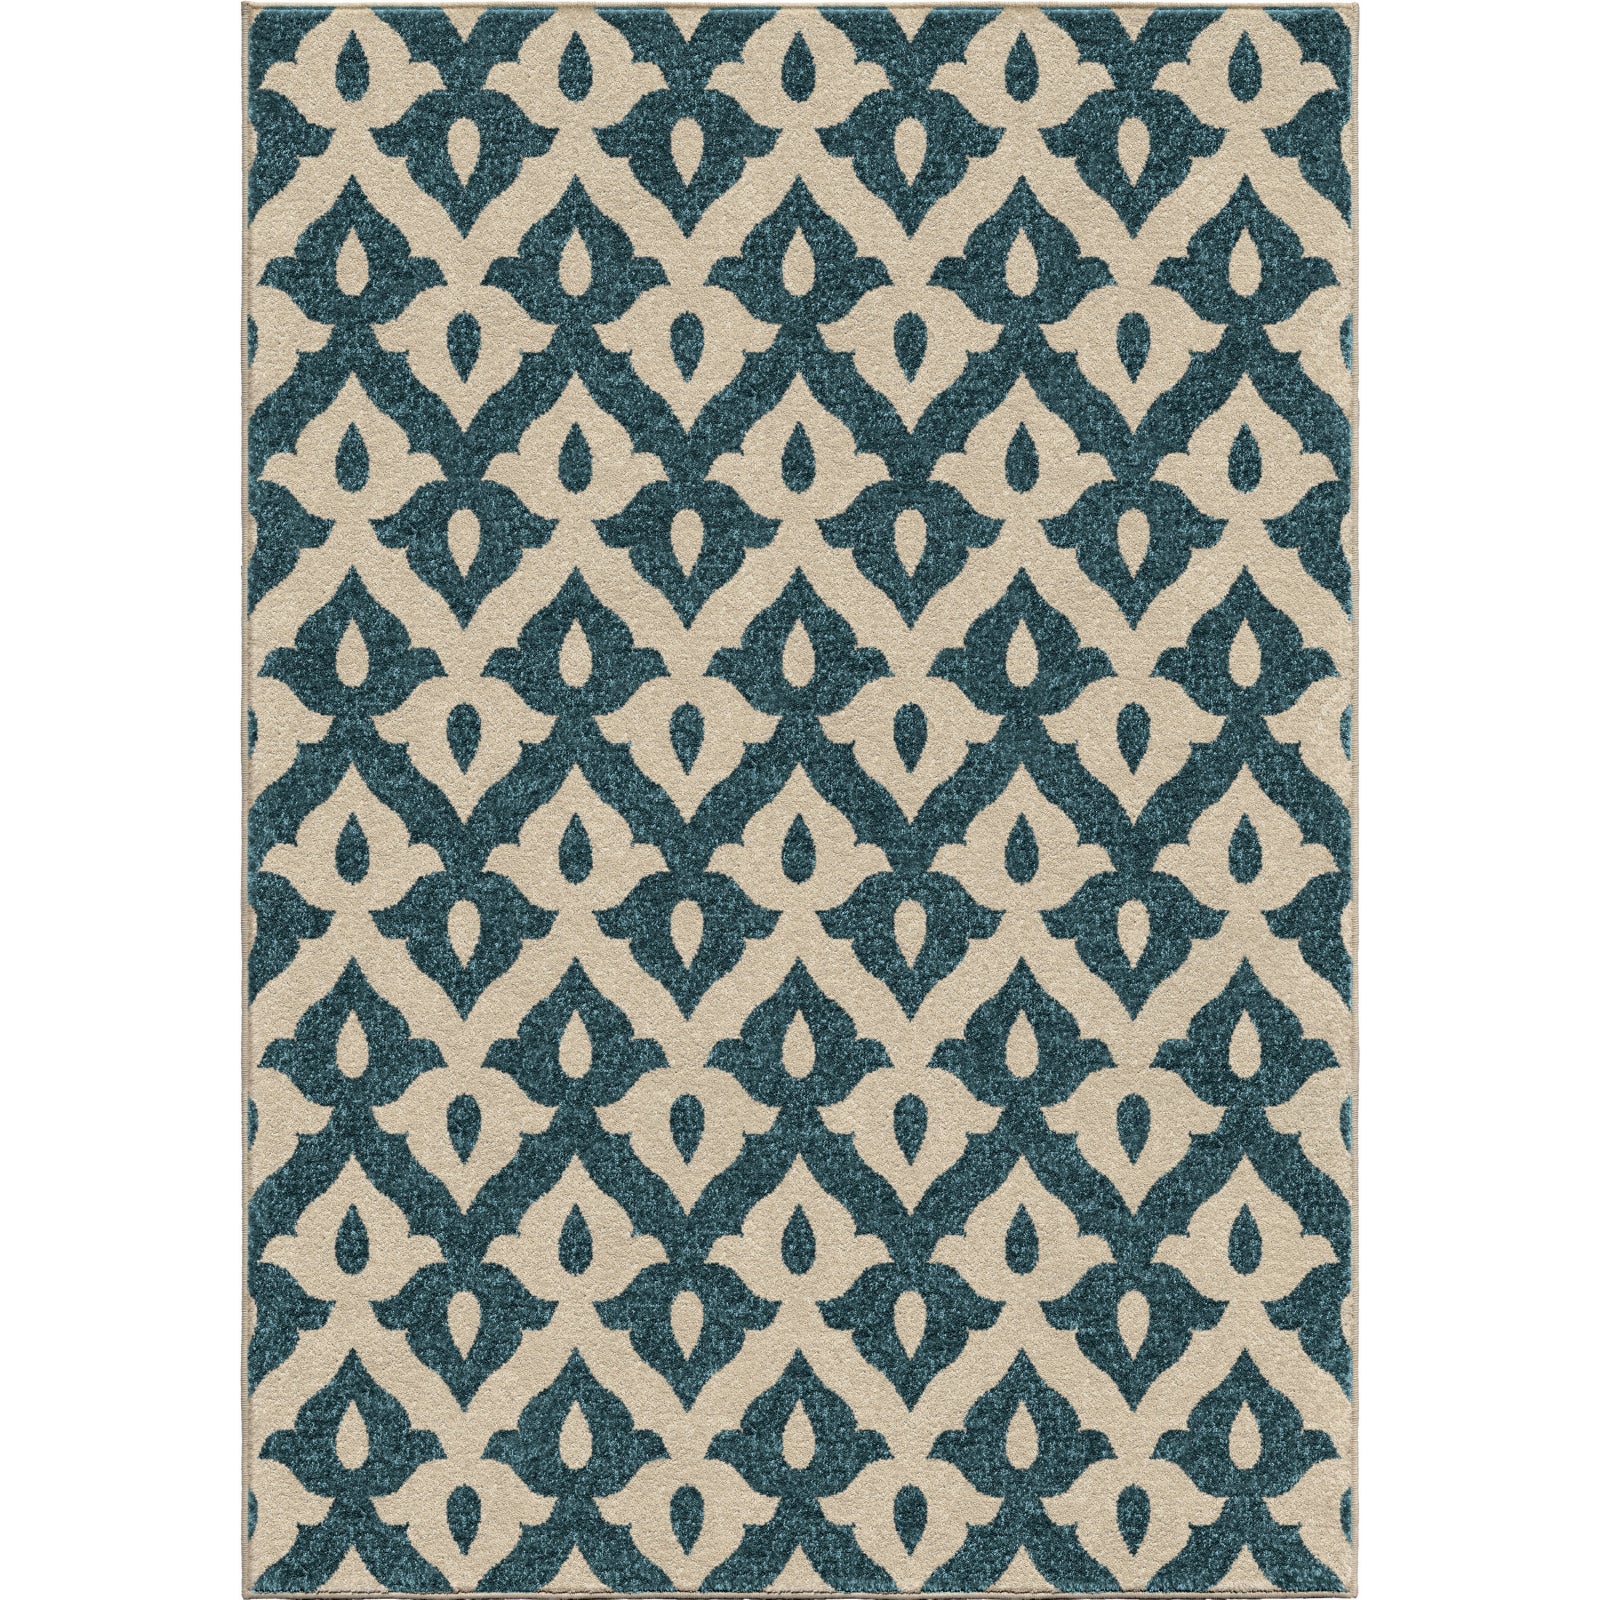 Orian Rugs Promise Family Crest Blue Area Rug main image